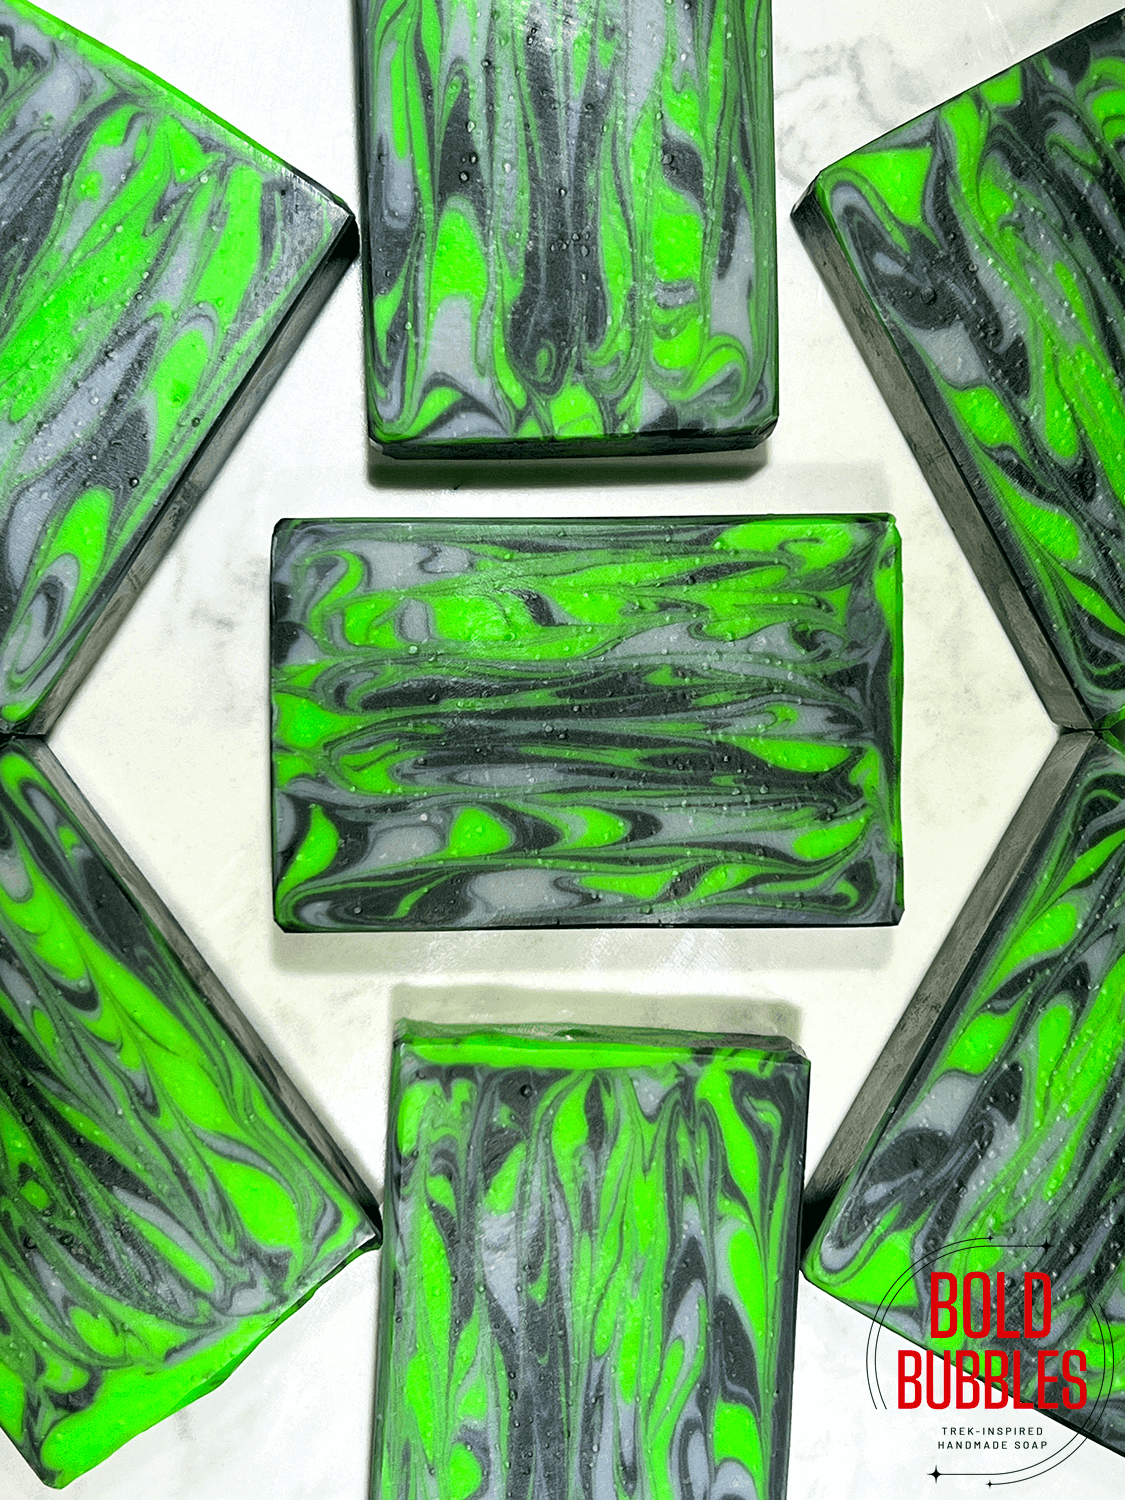 Vertical swirls of neon green, black and grey soap inspired by the Borg in Star Trek.